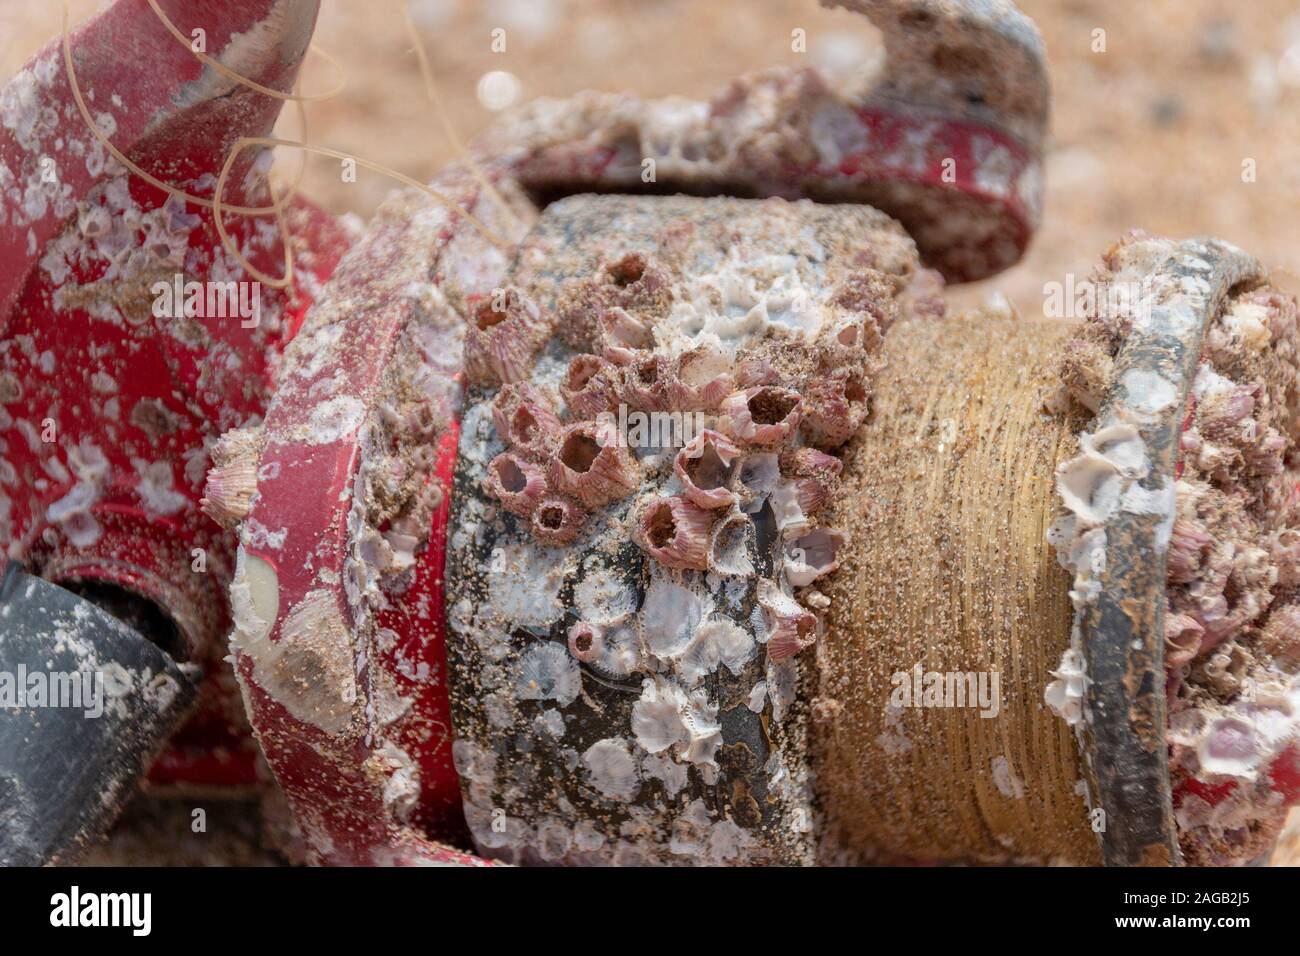 A close up view of a old fishing reel that has been sitting in the water for a long time, covered in barnacles covering the surface Stock Photo